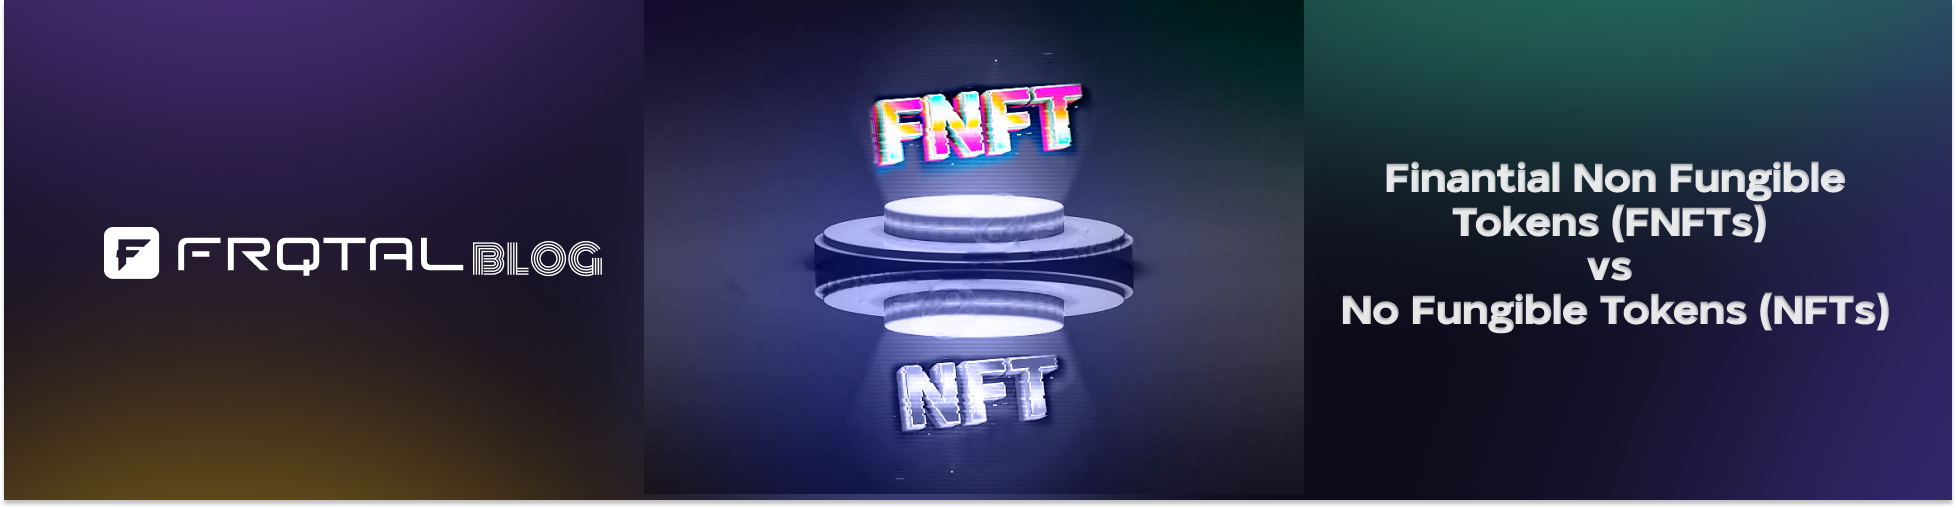 Finantial Non Fungible Tokens (FNFTs) vs No Fungible Tokens (NFTs):